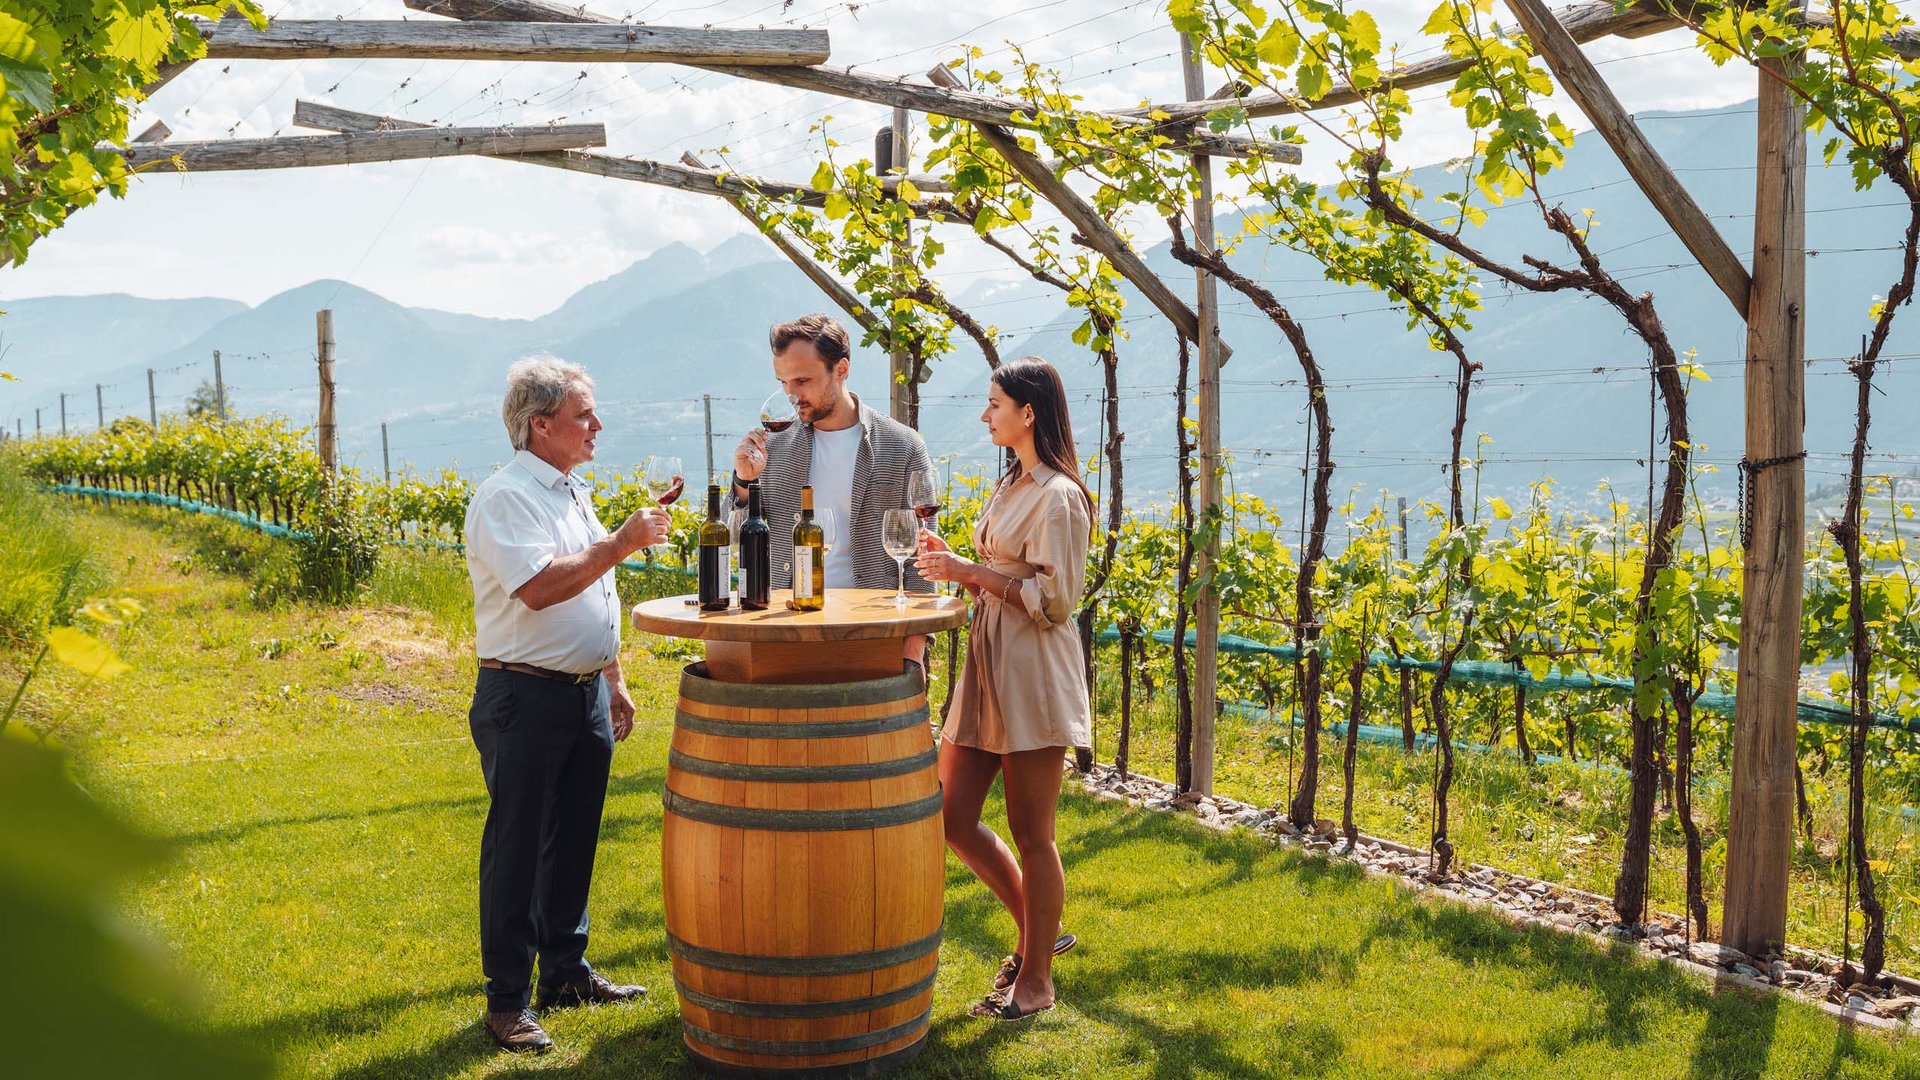 Your wine hotel in South Tyrol: Resmairhof